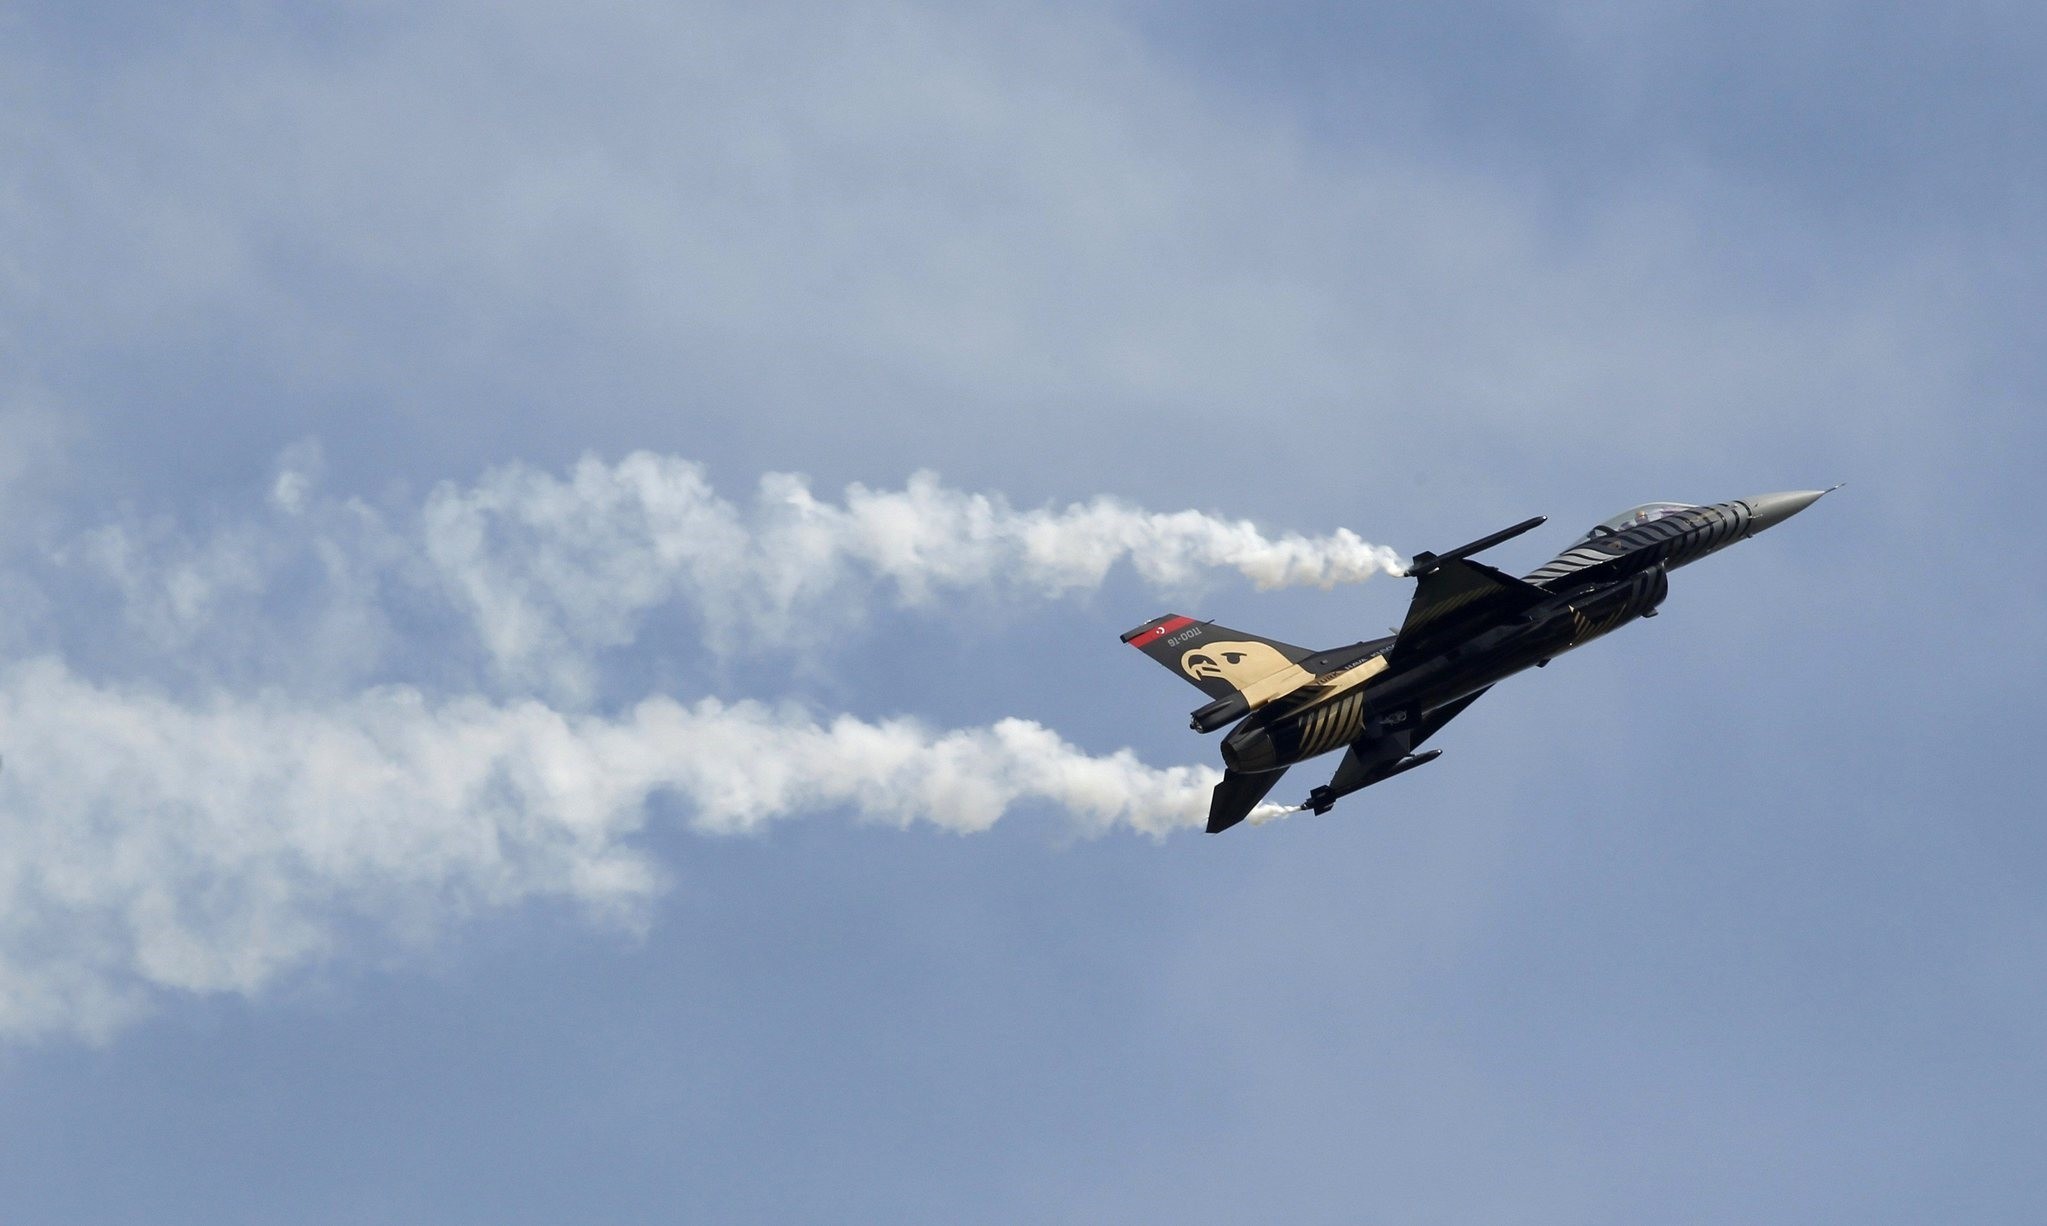 A F-16 Solo Display Team performs over the Akinci Millitary Air Base during an event as part of celebrations of the 100th anniversary of the Turkish Air Force in Ankara April 15, 2011. (REUTERS Photo)